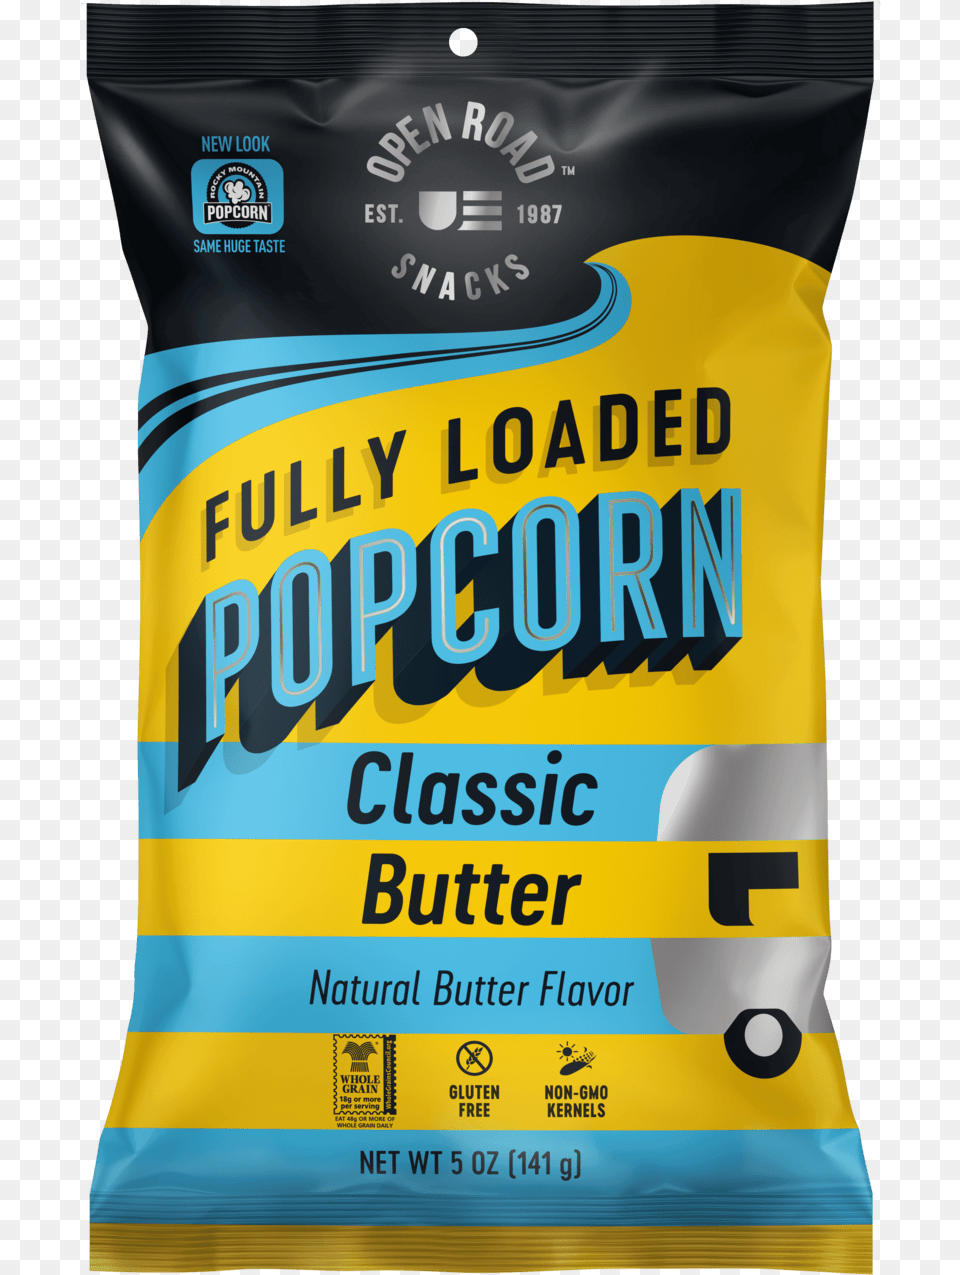 Classic Butter Popcorn Front Of Package Cat Supply, Powder, Flour, Food, Can Free Png